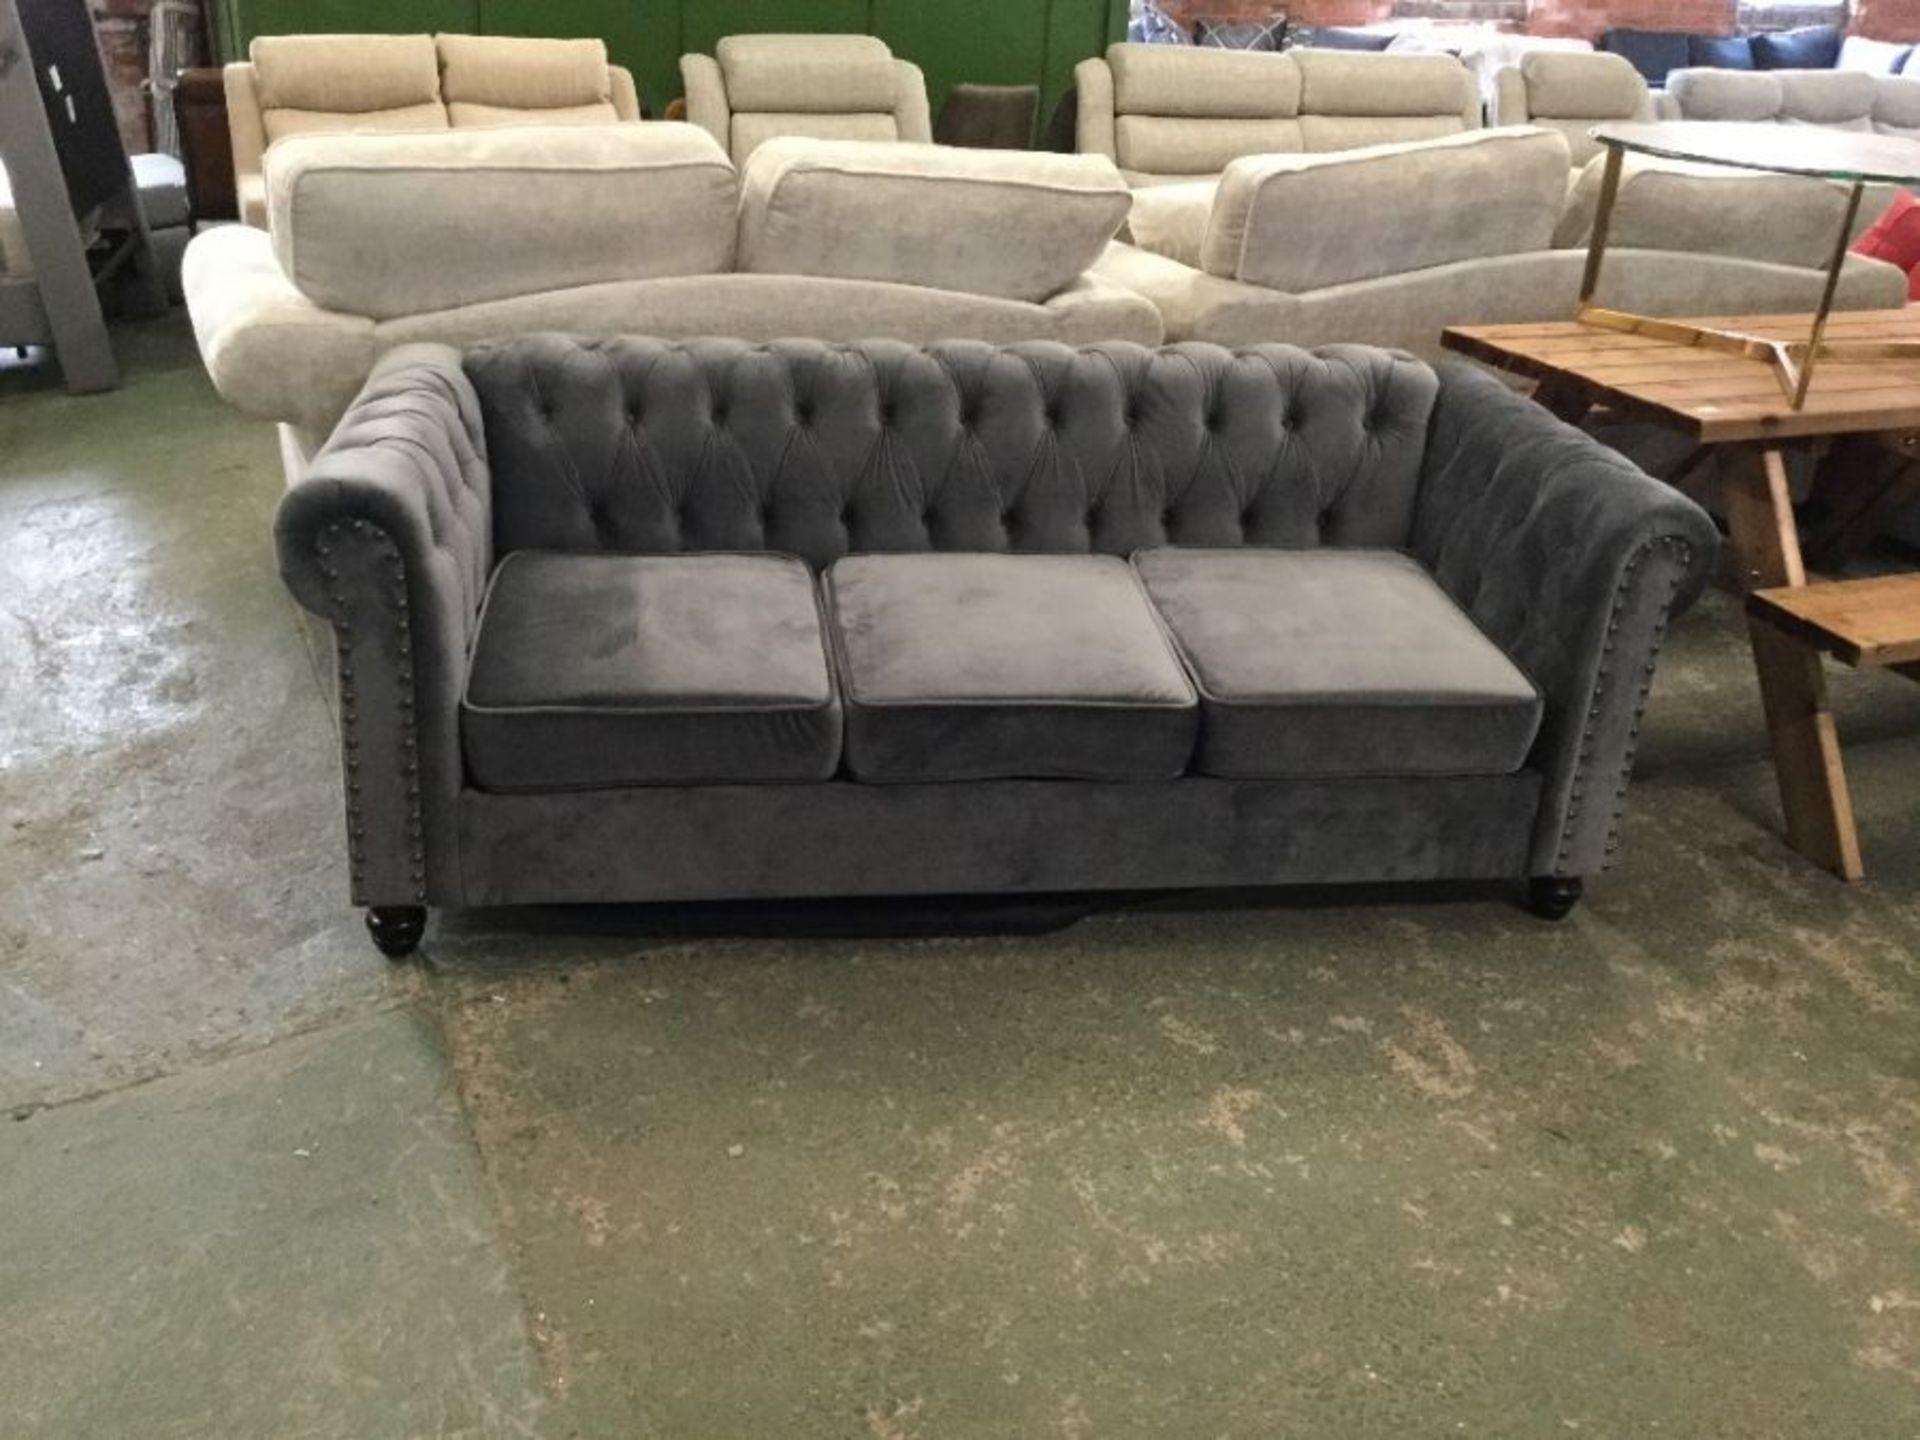 PADSTOW 3 SEATER CHESTERFIELD SOFA